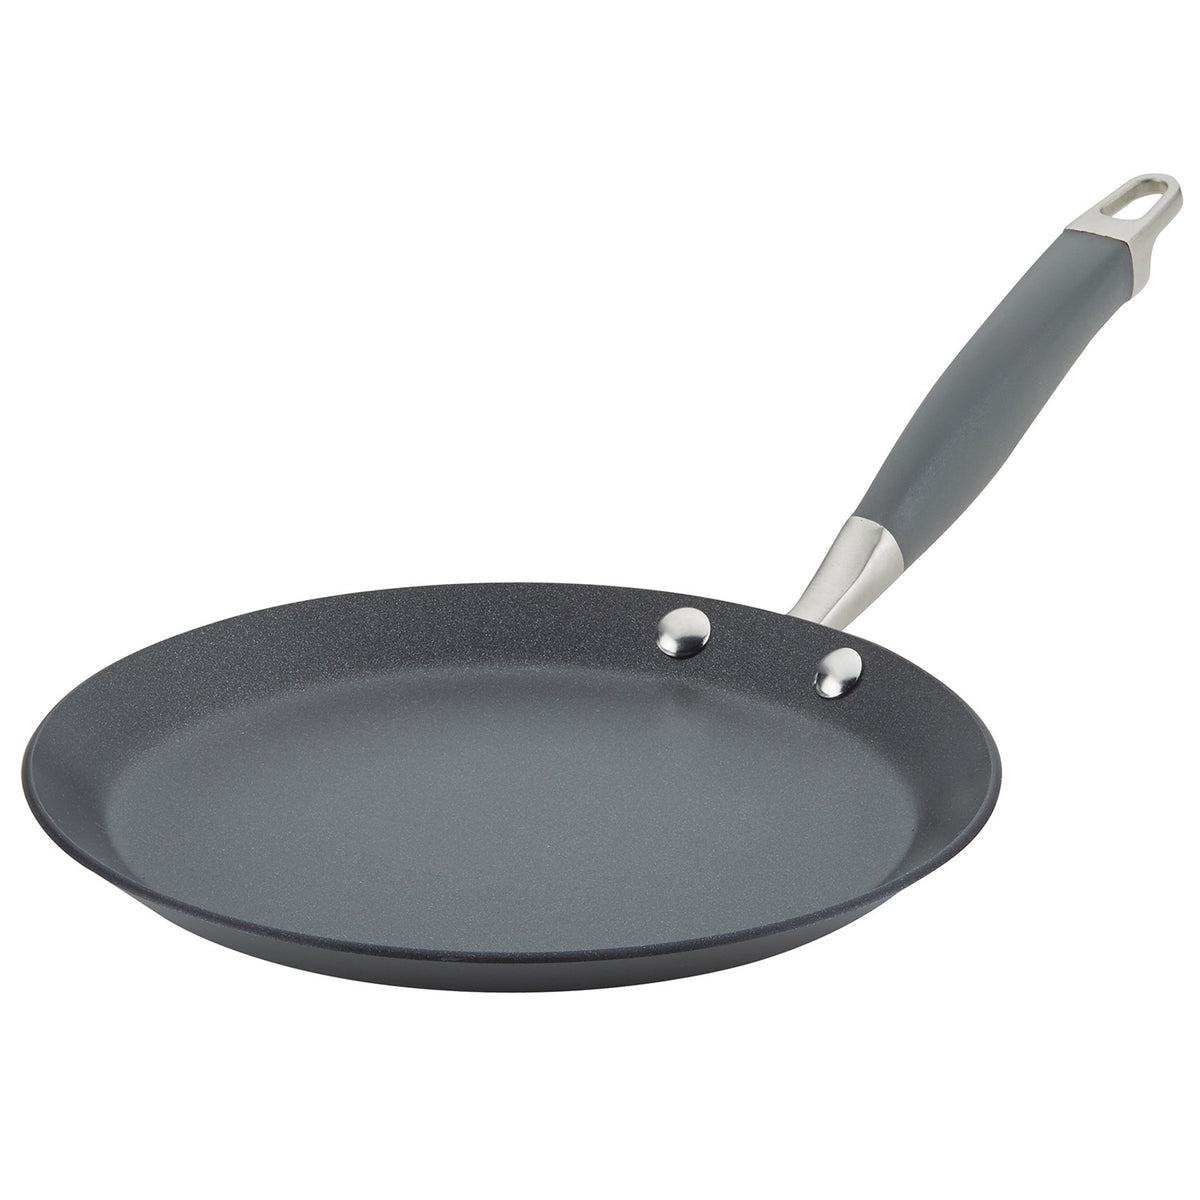 Anolon Advanced Home Hard-Anodized 12 Nonstick Ultimate Pan - Onyx